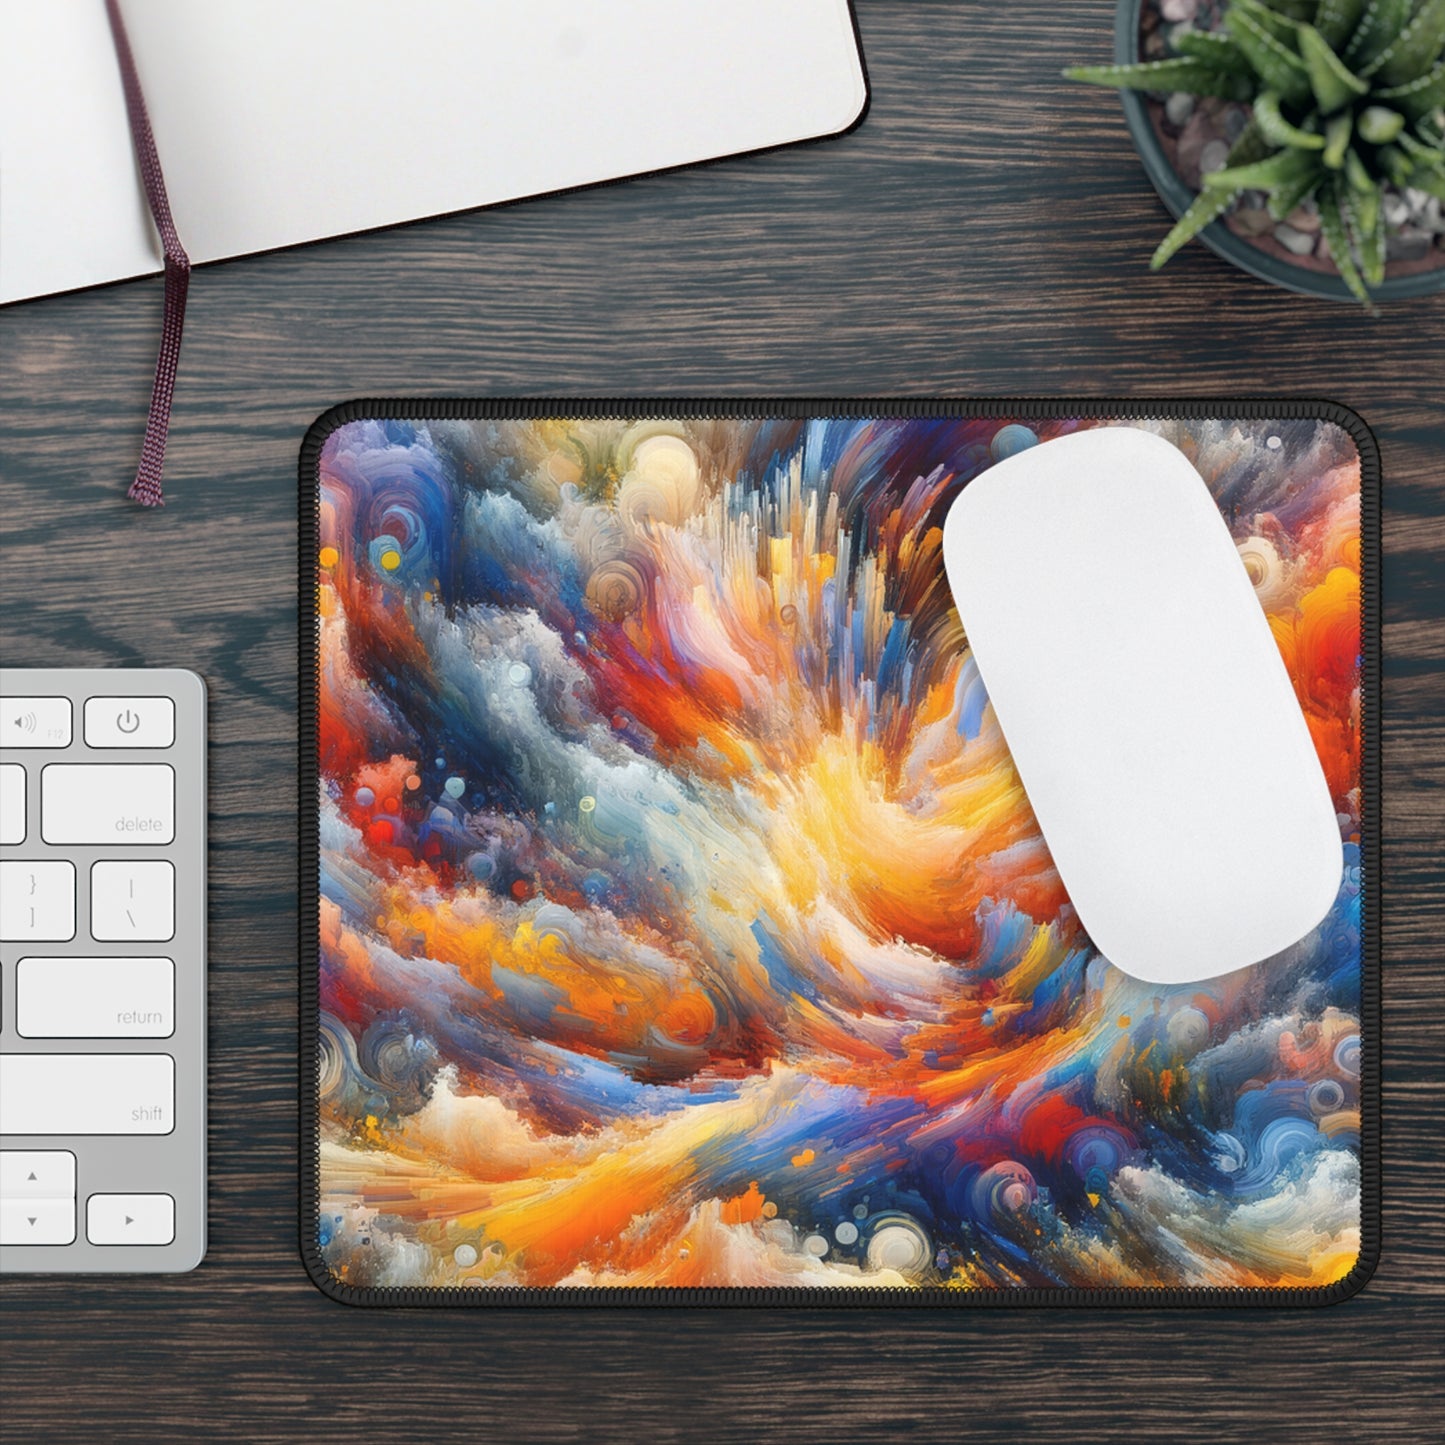 "Vibrant Chaos". - The Alien Gaming Mouse Pad Abstract Expressionism Style